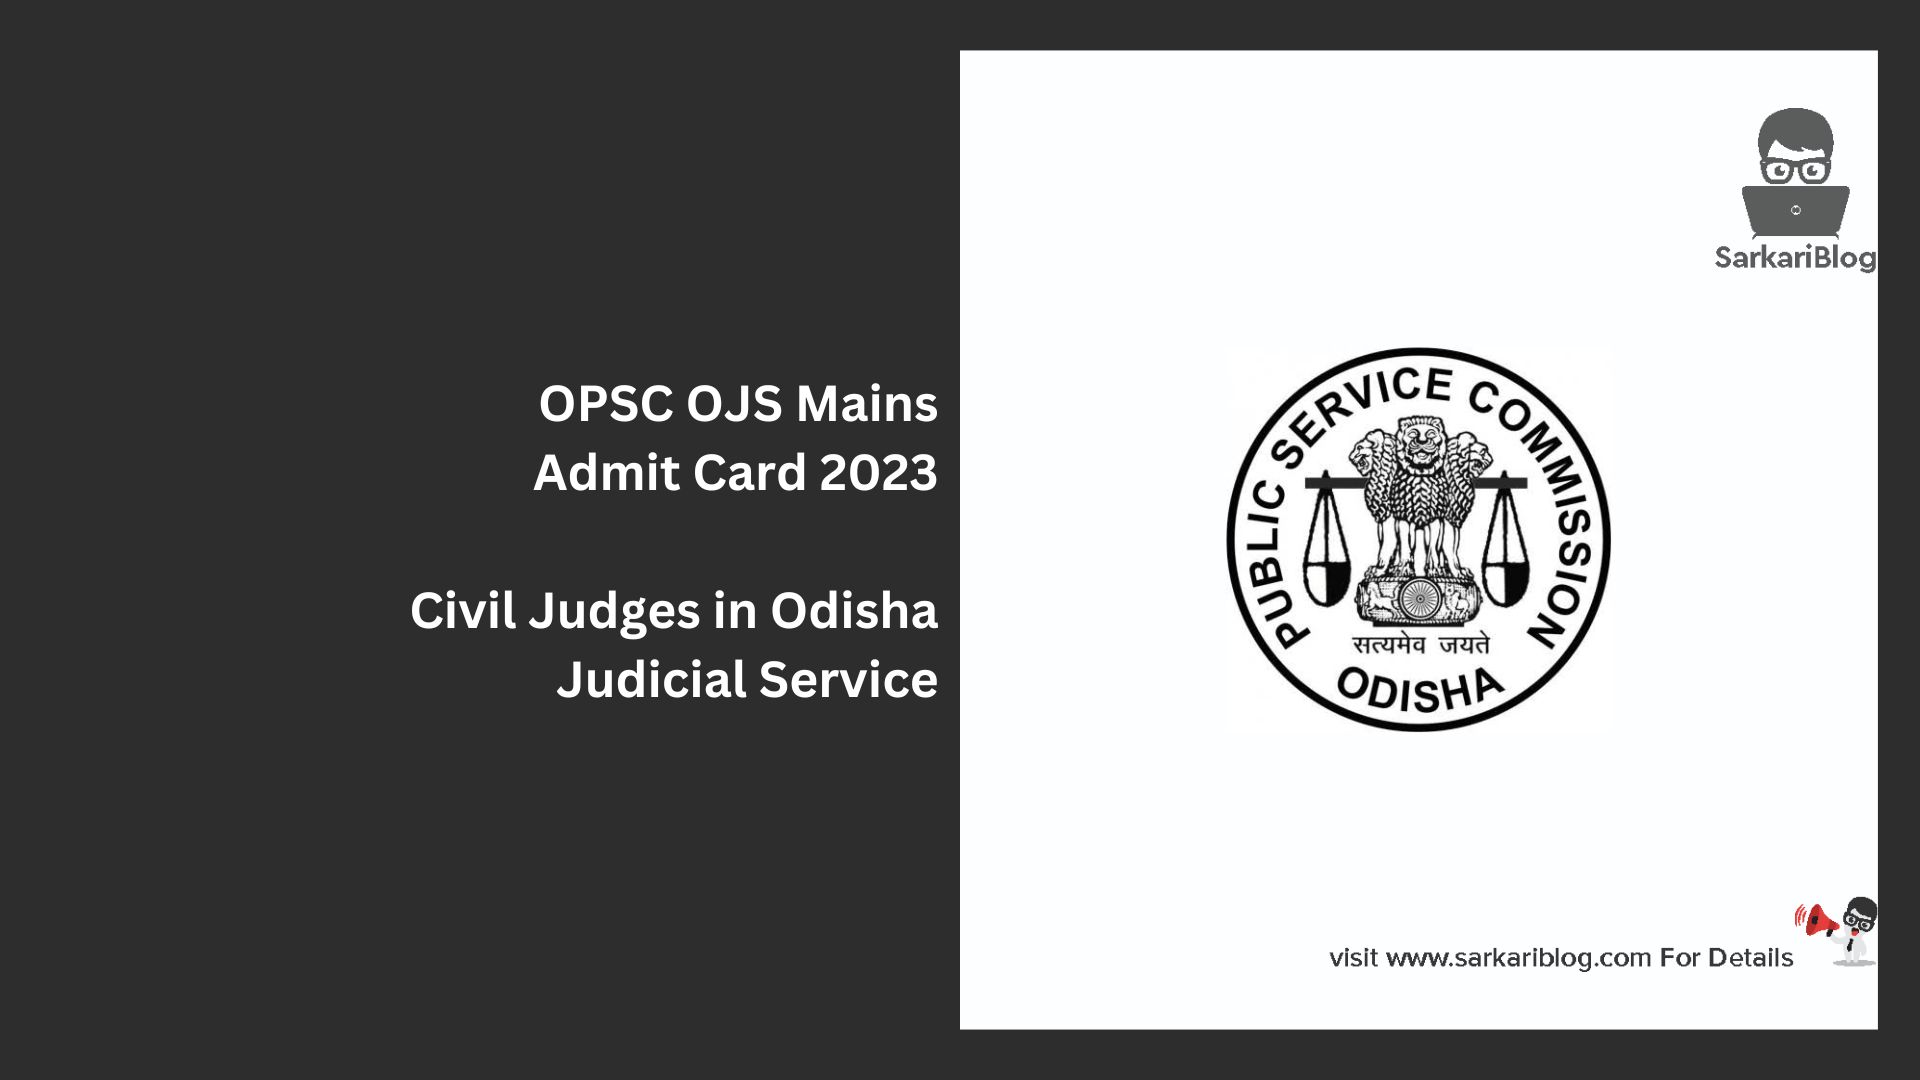 OPSC OJS Mains Admit Card 2023